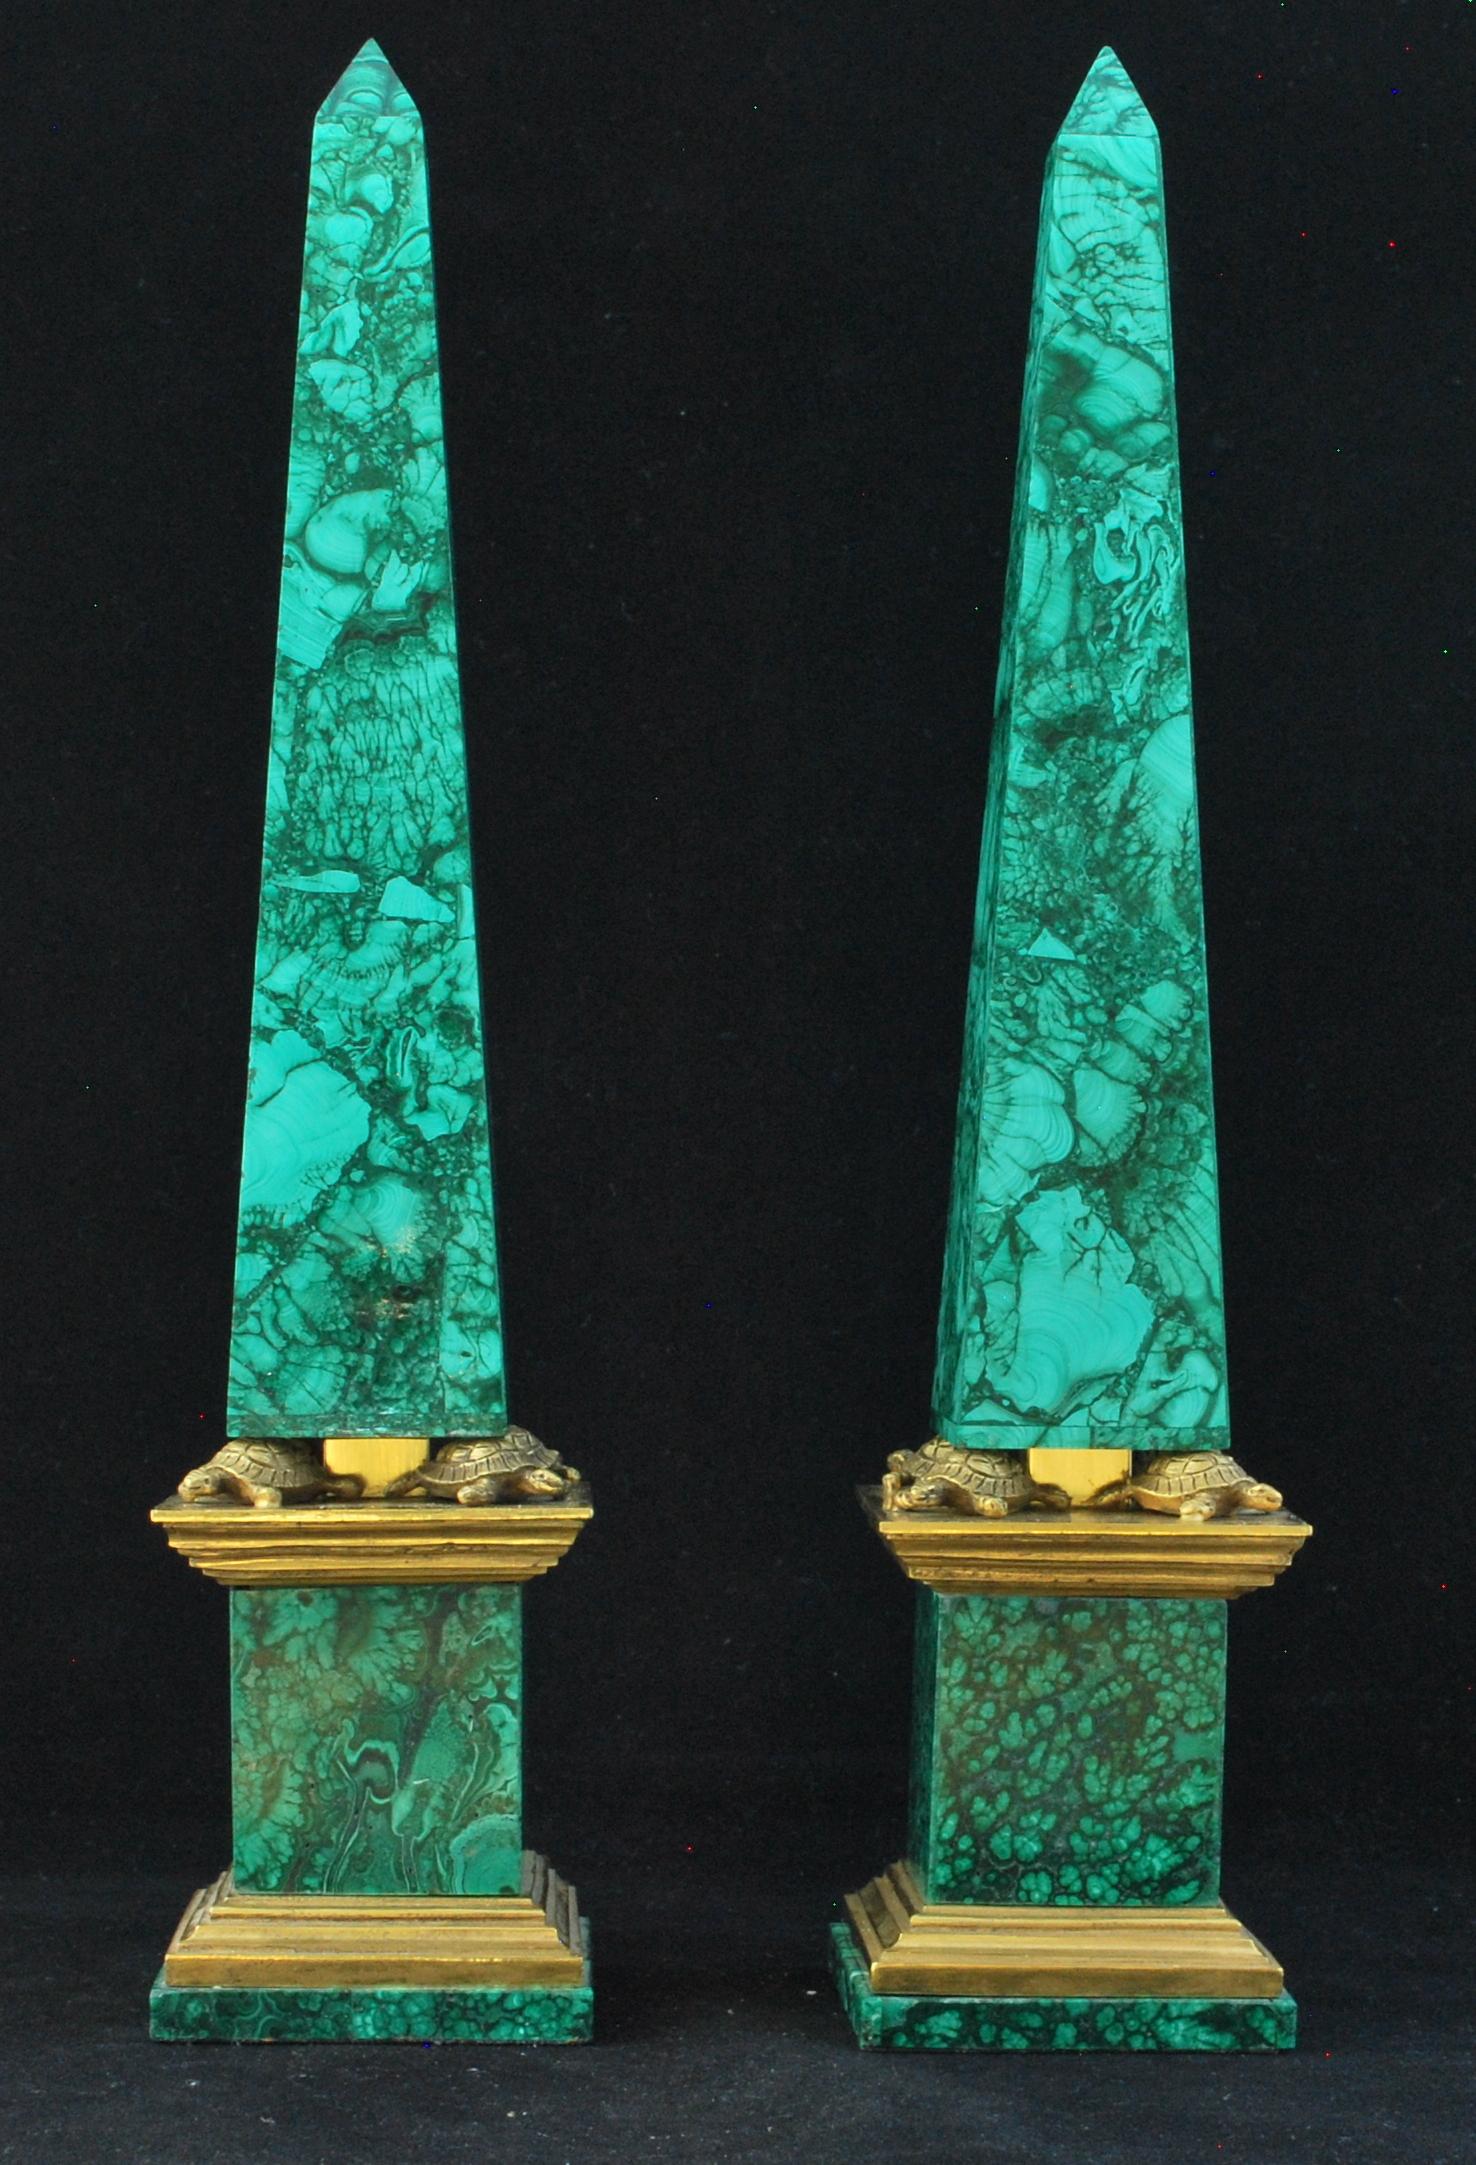 A striking pair of obelisks, in ormolu with malachite facings. The obelisks are supported on the backs of ormolu turtles, adding charm and interest.